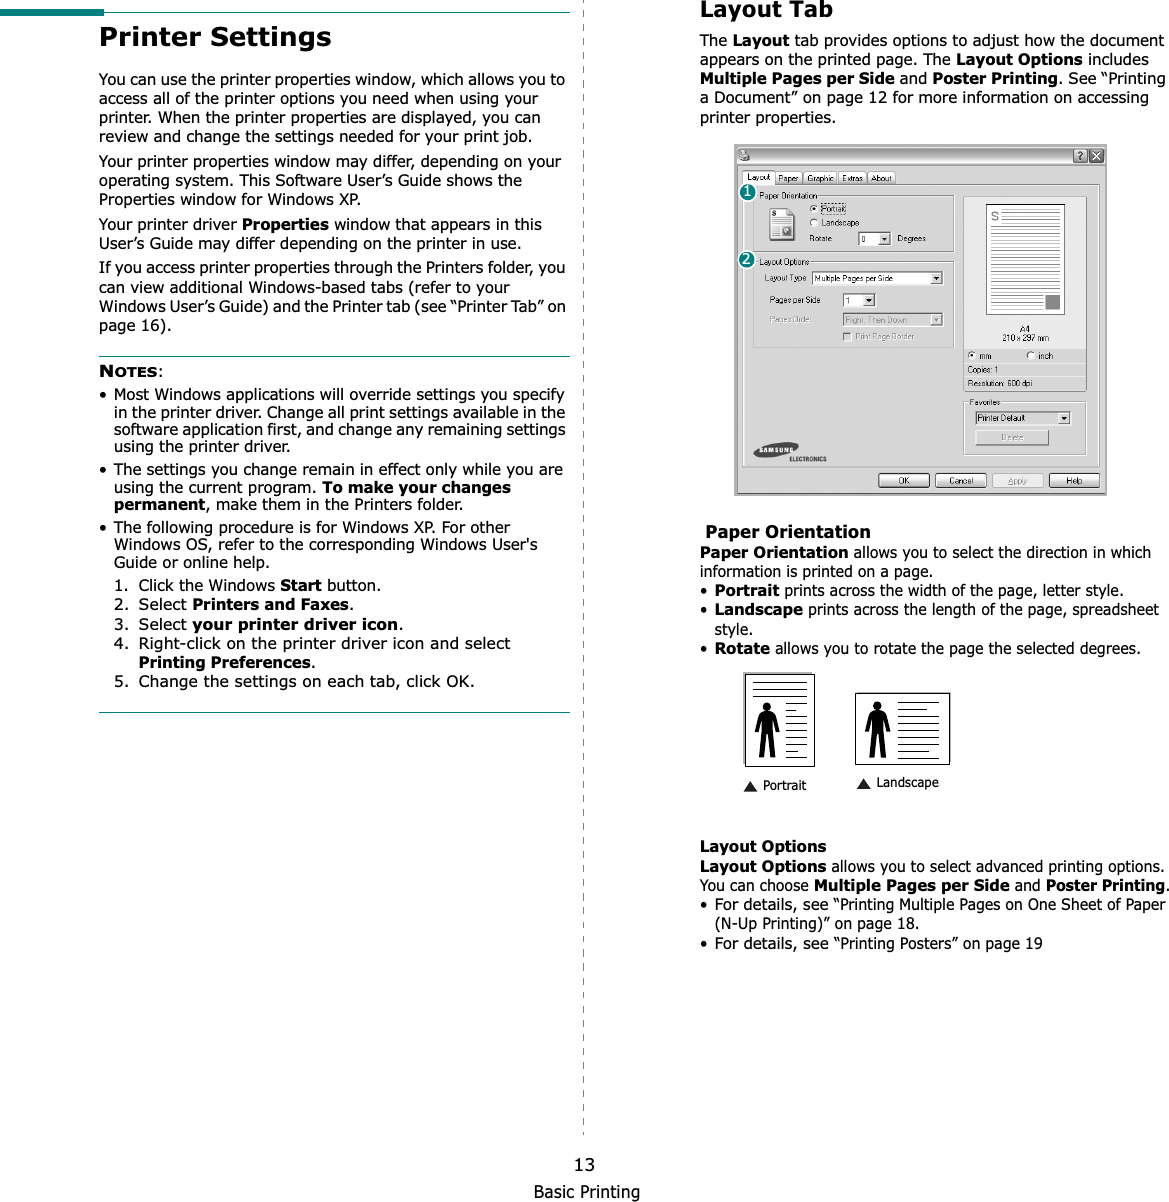 Basic Printing13Printer SettingsYou can use the printer properties window, which allows you to access all of the printer options you need when using your printer. When the printer properties are displayed, you can review and change the settings needed for your print job. Your printer properties window may differ, depending on your operating system. This Software User’s Guide shows the Properties window for Windows XP.Your printer driver Properties window that appears in this User’s Guide may differ depending on the printer in use.If you access printer properties through the Printers folder, you can view additional Windows-based tabs (refer to your Windows User’s Guide) and the Printer tab (see “Printer Tab” on page 16).NOTES:• Most Windows applications will override settings you specify in the printer driver. Change all print settings available in the software application first, and change any remaining settings using the printer driver. • The settings you change remain in effect only while you are using the current program. To make your changes permanent, make them in the Printers folder. • The following procedure is for Windows XP. For other Windows OS, refer to the corresponding Windows User&apos;s Guide or online help.1. Click the Windows Start button.2. Select Printers and Faxes.3. Select your printer driver icon.4. Right-click on the printer driver icon and select Printing Preferences.5. Change the settings on each tab, click OK.Layout TabThe Layout tab provides options to adjust how the document appears on the printed page. The Layout Options includes Multiple Pages per Side and Poster Printing. See “Printing a Document” on page 12 for more information on accessing printer properties.  Paper OrientationPaper Orientation allows you to select the direction in which information is printed on a page. •Portrait prints across the width of the page, letter style. •Landscape prints across the length of the page, spreadsheet style. •Rotate allows you to rotate the page the selected degrees.Layout OptionsLayout Options allows you to select advanced printing options. You can choose Multiple Pages per Side and Poster Printing.•For details, see “Printing Multiple Pages on One Sheet of Paper (N-Up Printing)” on page 18.•For details, see “Printing Posters” on page 1912 Landscape Portrait